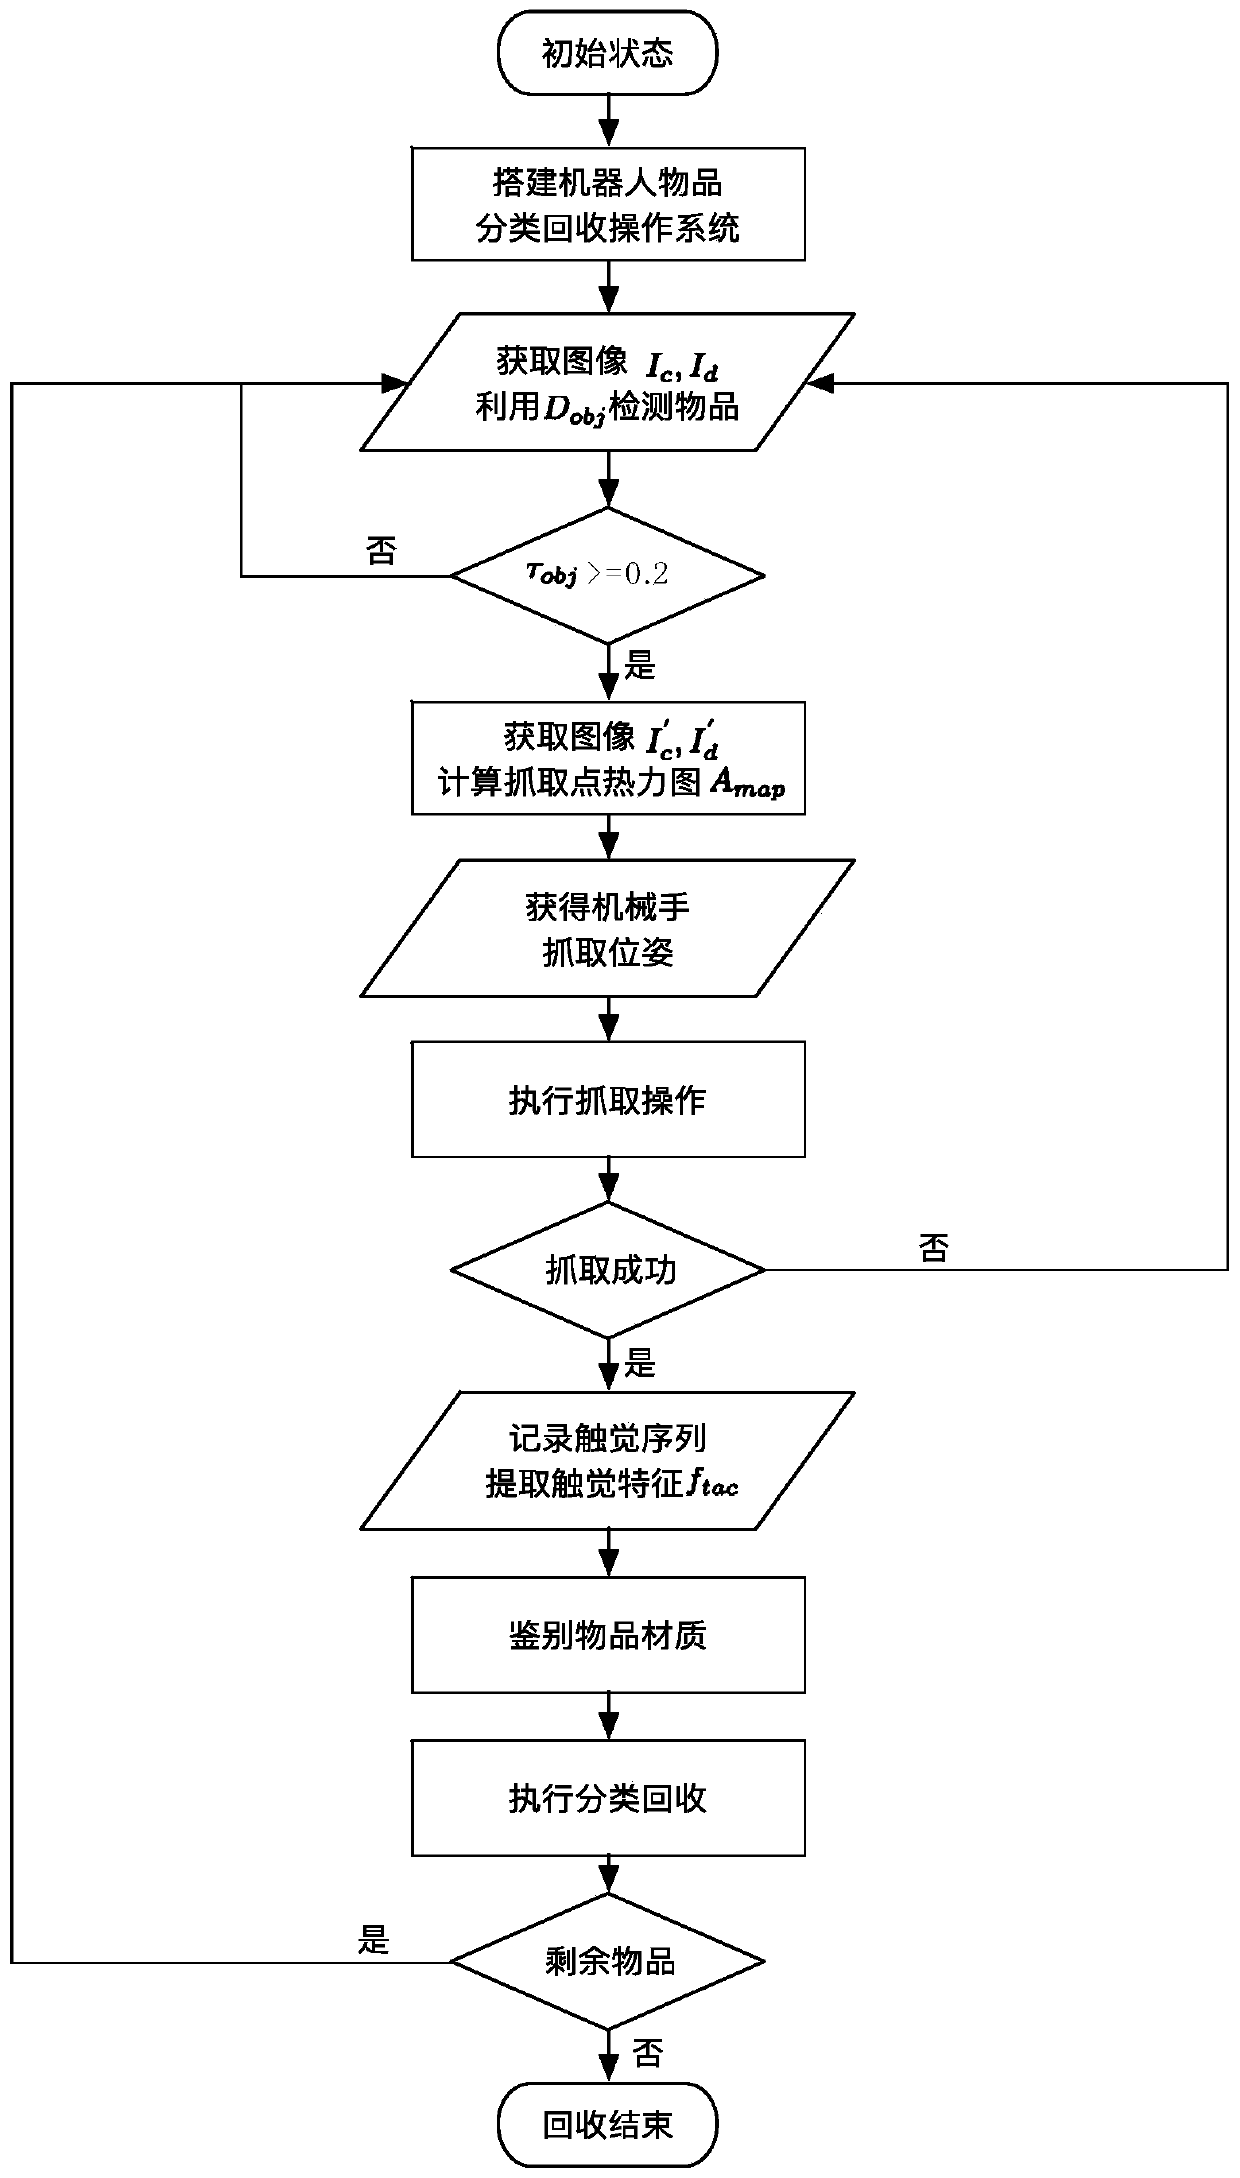 Article classification and recovery method based on multi-modal active perception